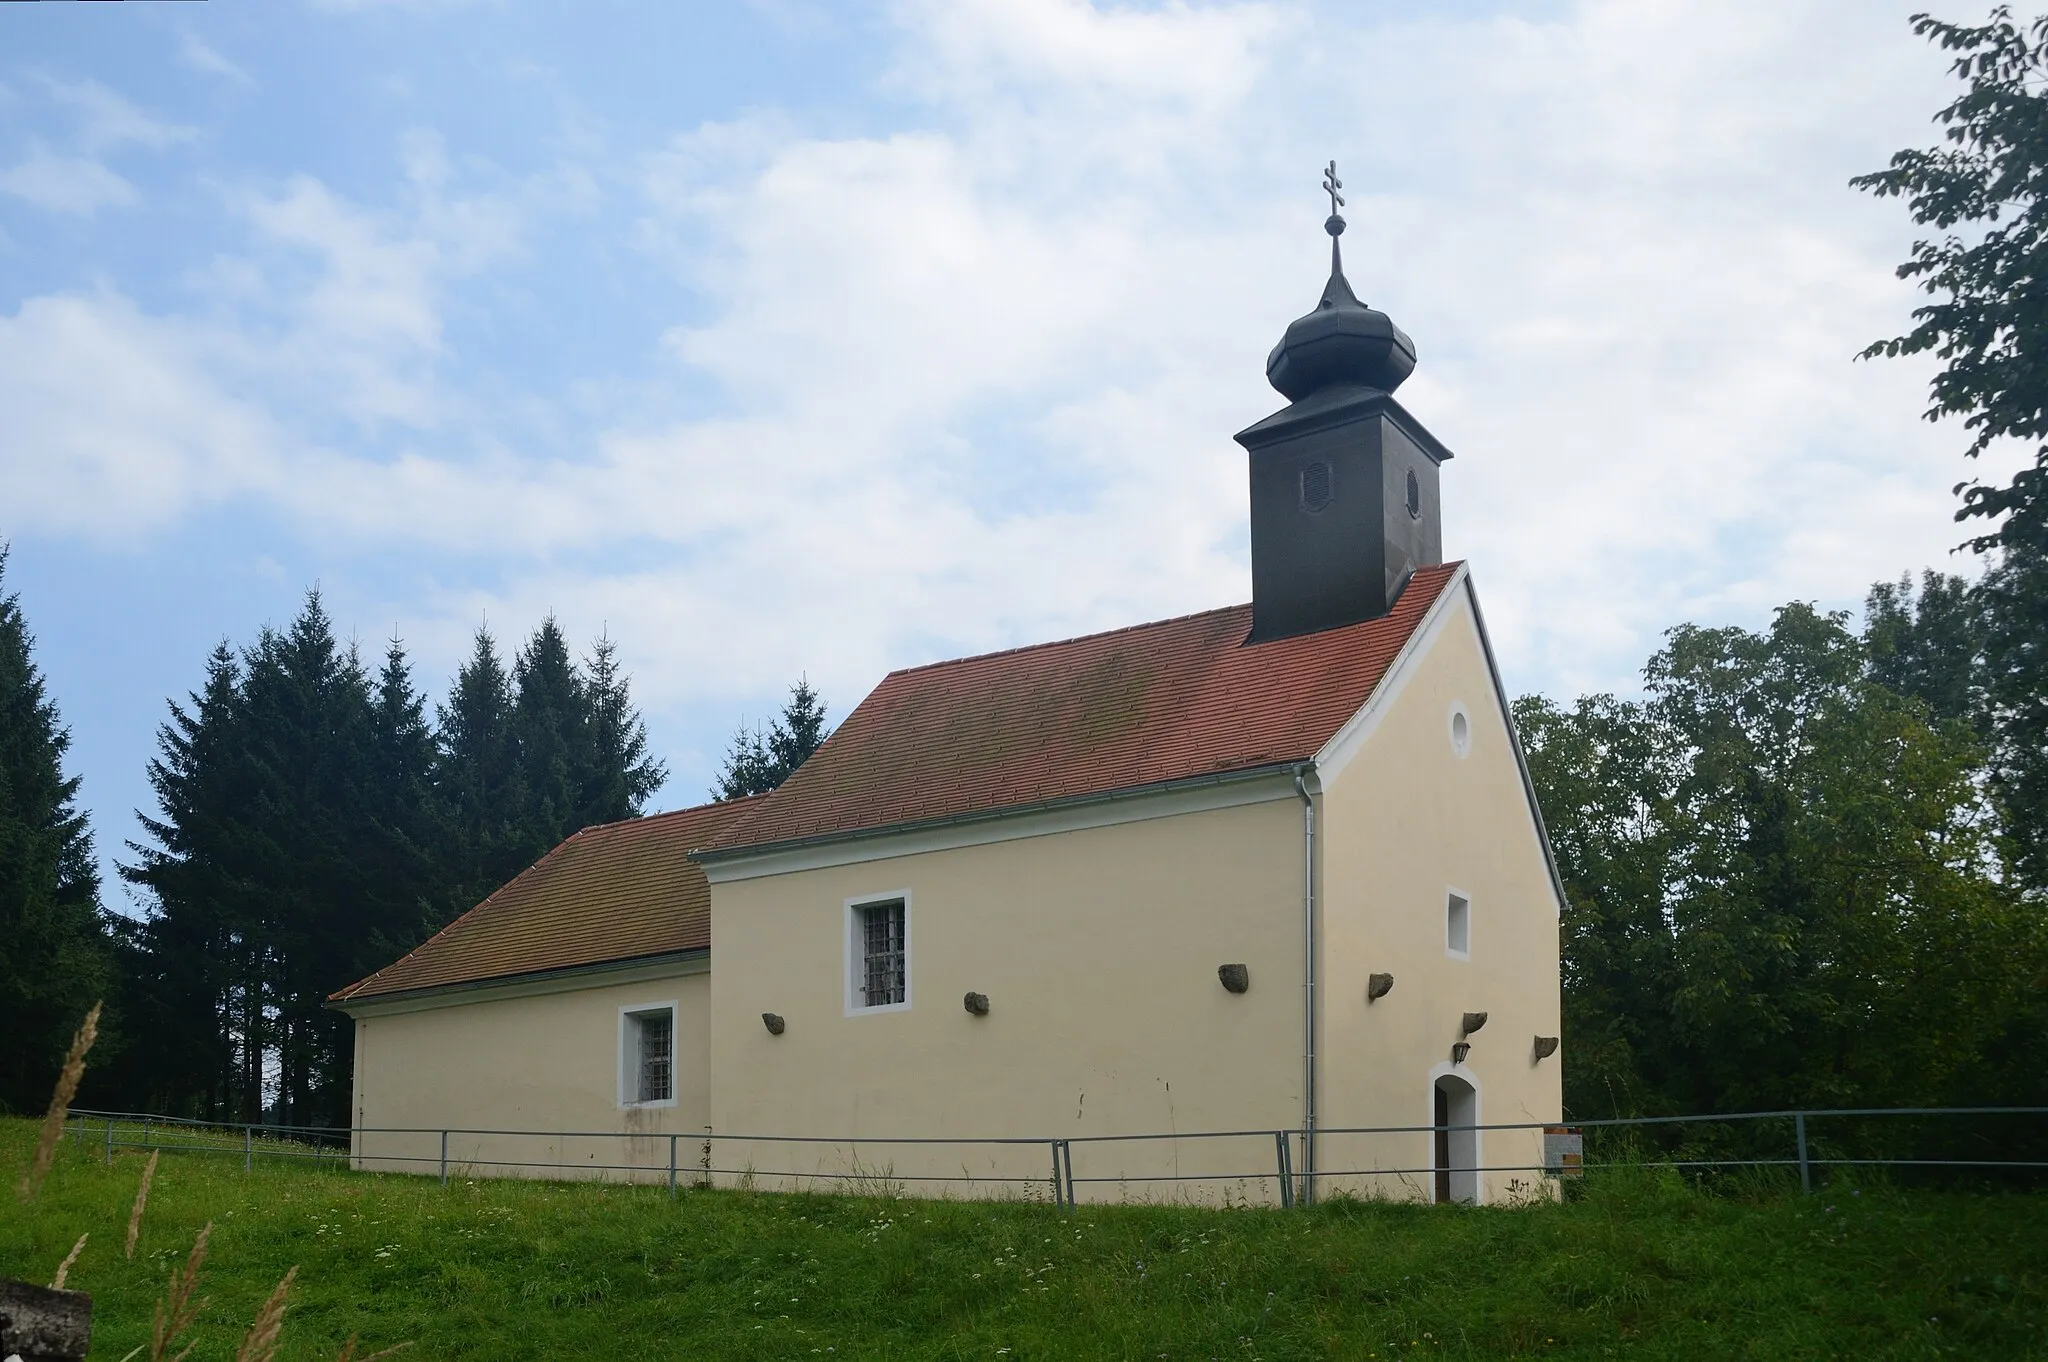 Photo showing: The parish church Saint Nikolaus, in Reinberg, former municipality of Riegersberg, now Vorau, Styria, is protected as a cultural heritage monument.